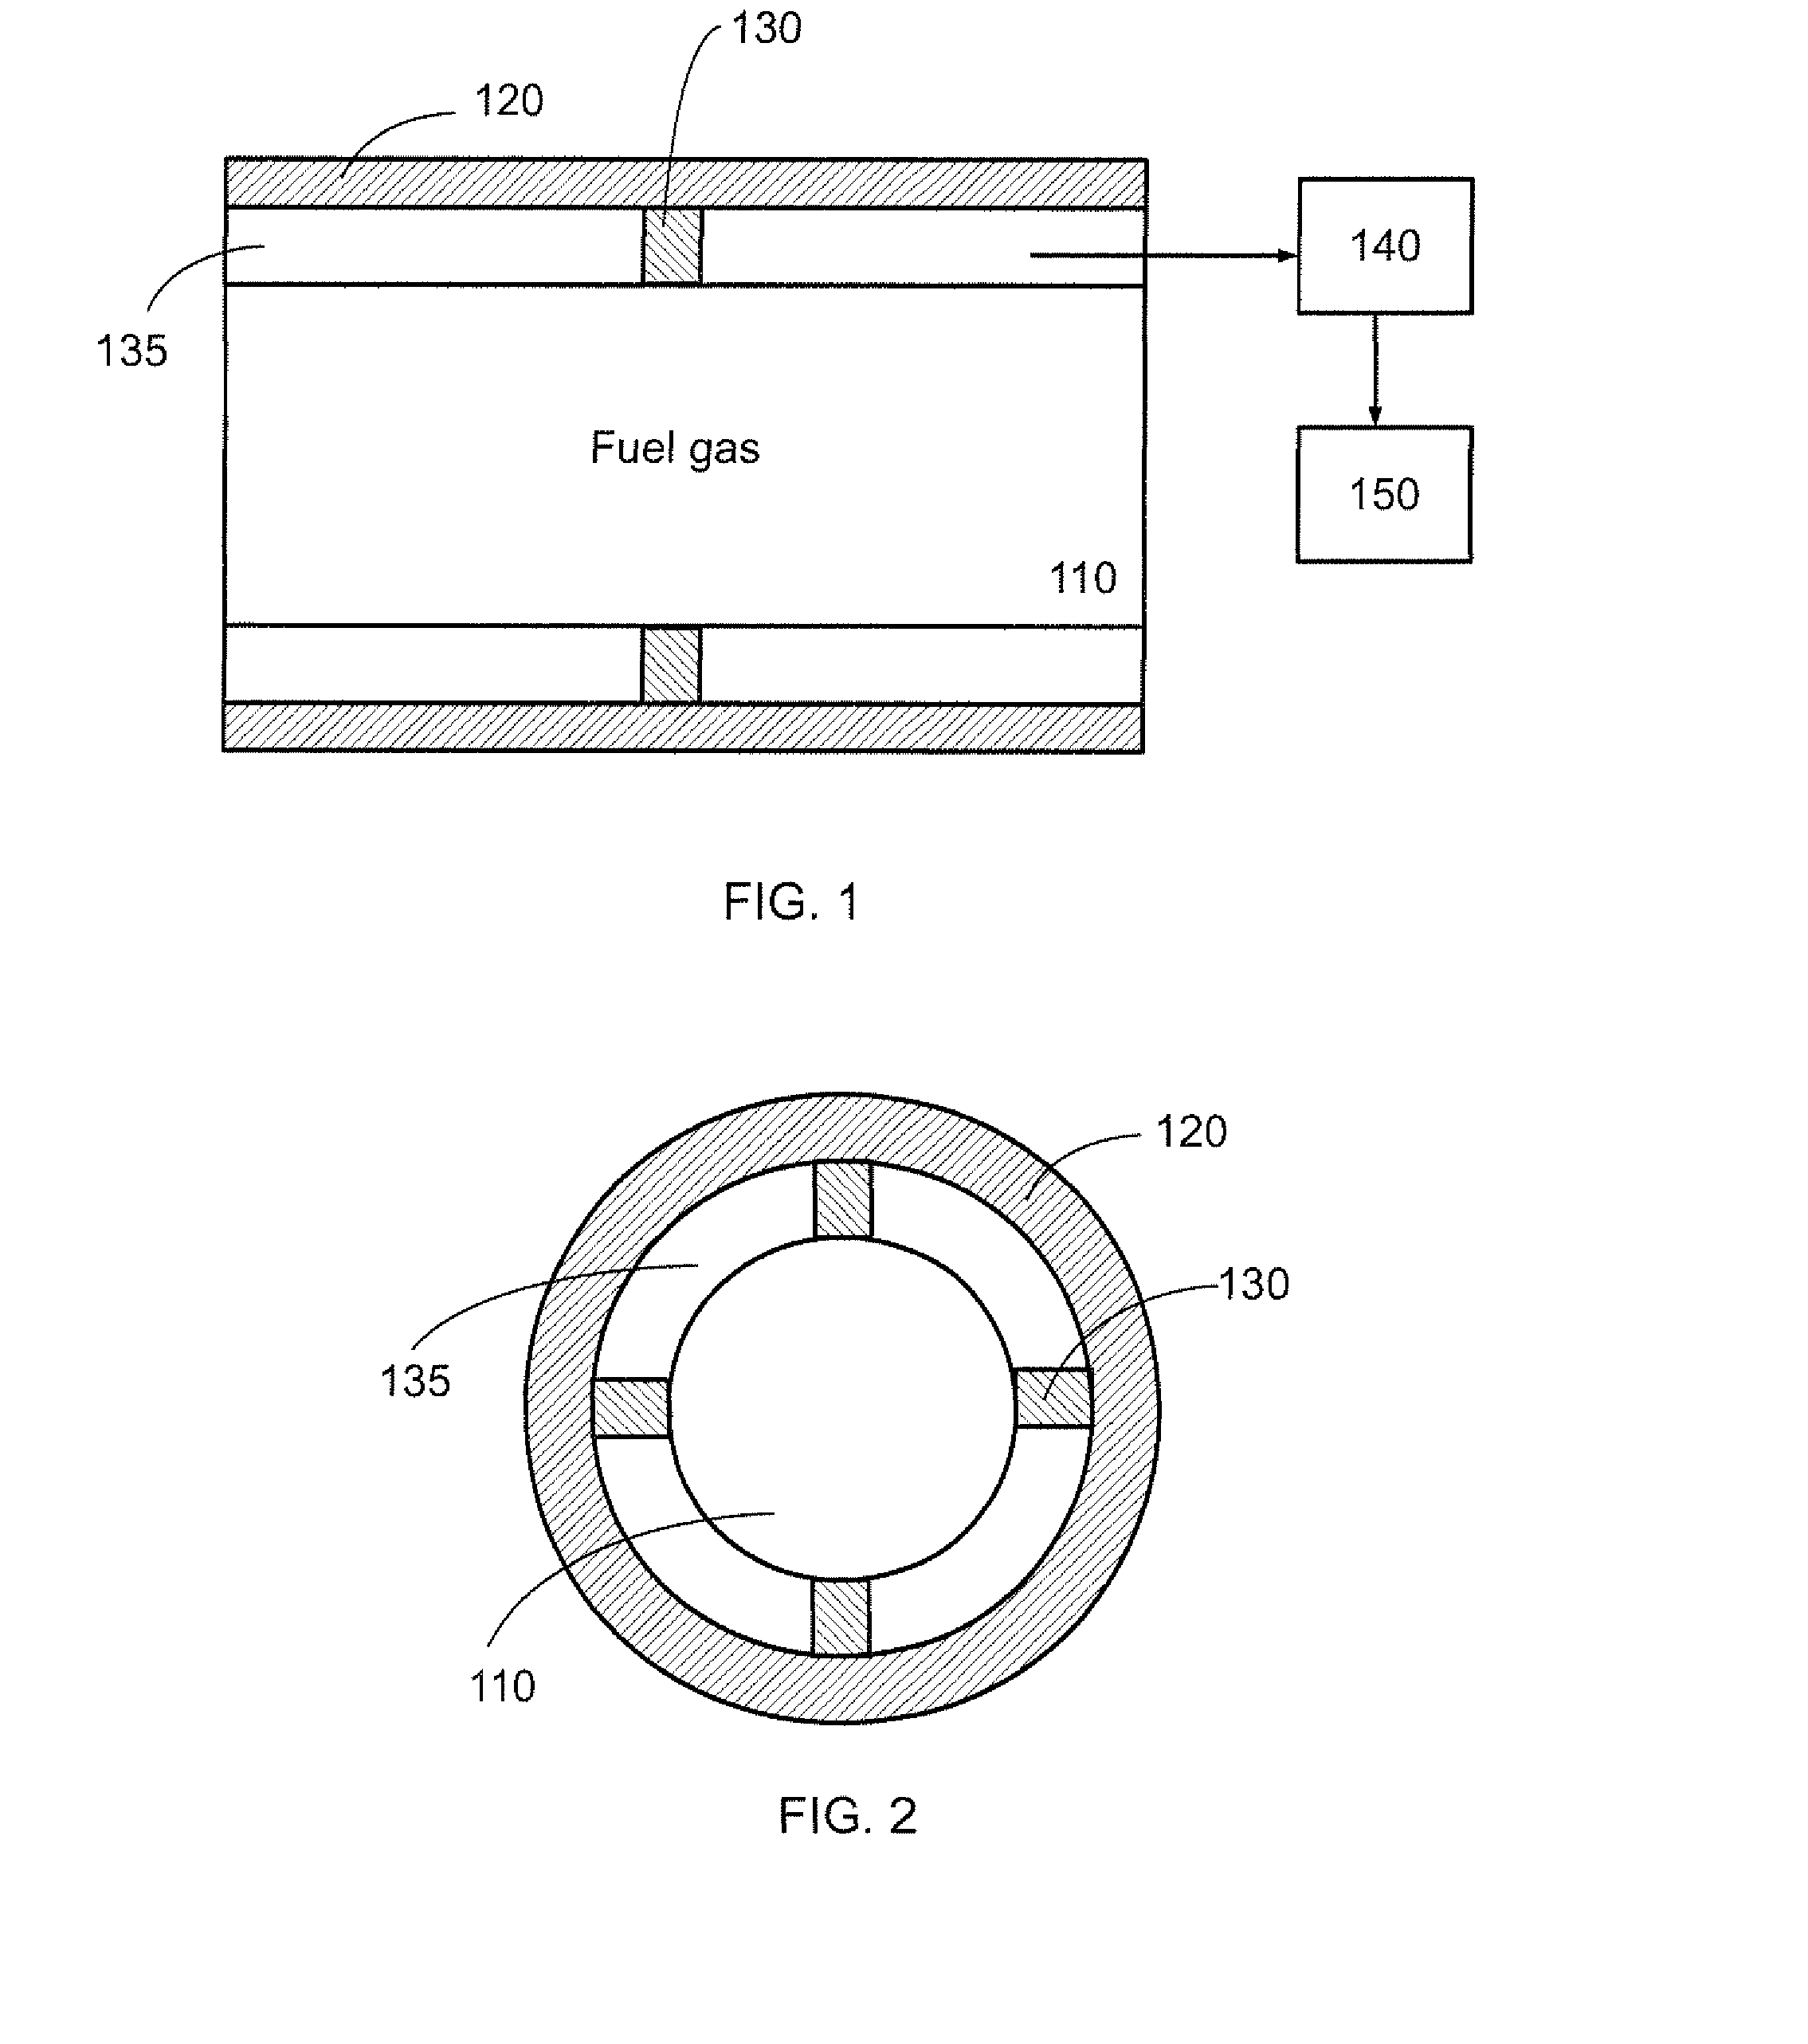 Method and system to detect and measure piping fuel leak